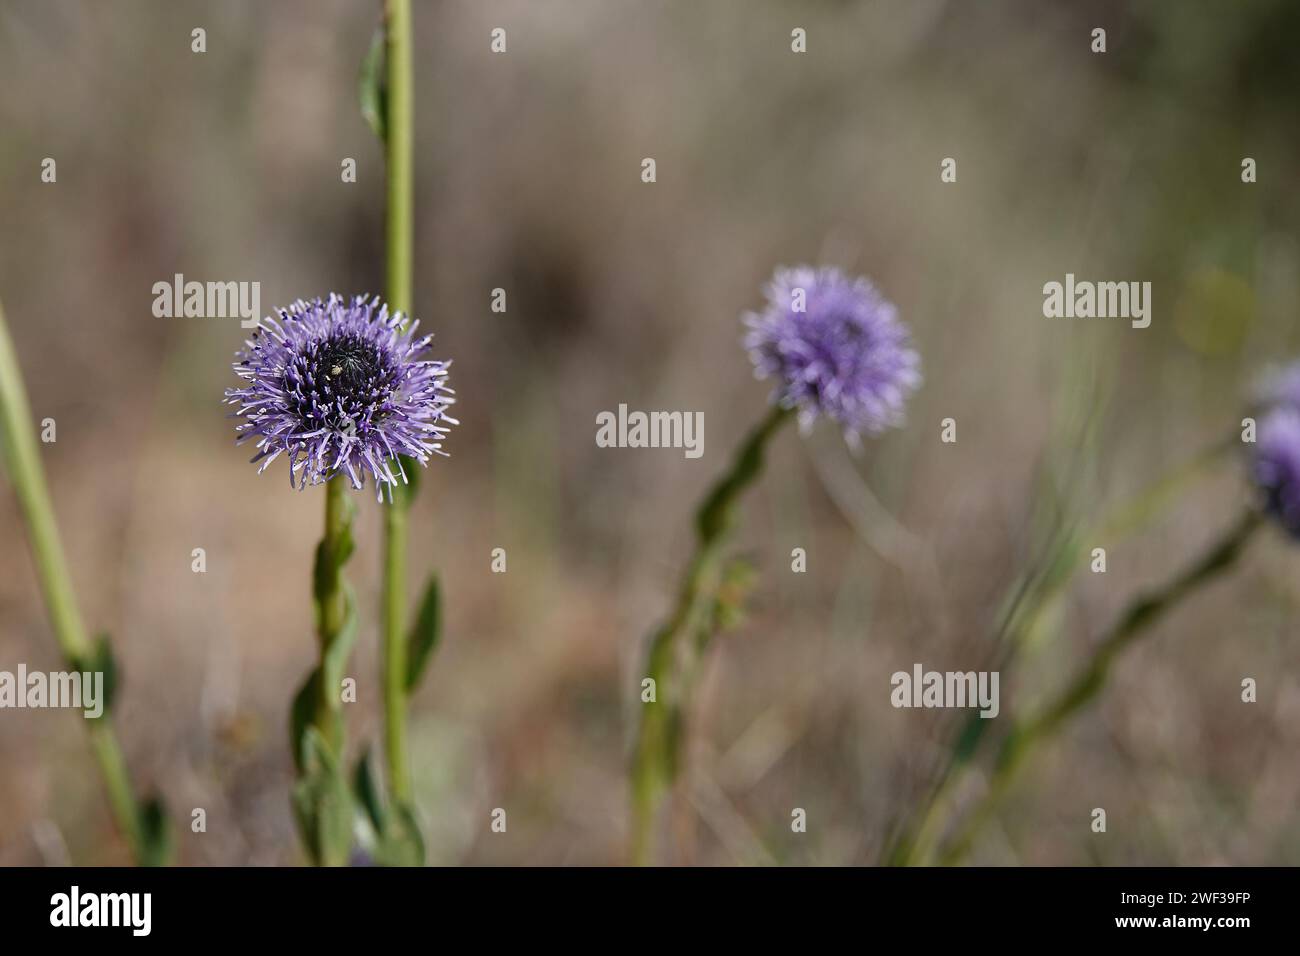 Natural closeup on the blue flower of the Common globularia Globularia vulgaris against a brown background Stock Photo